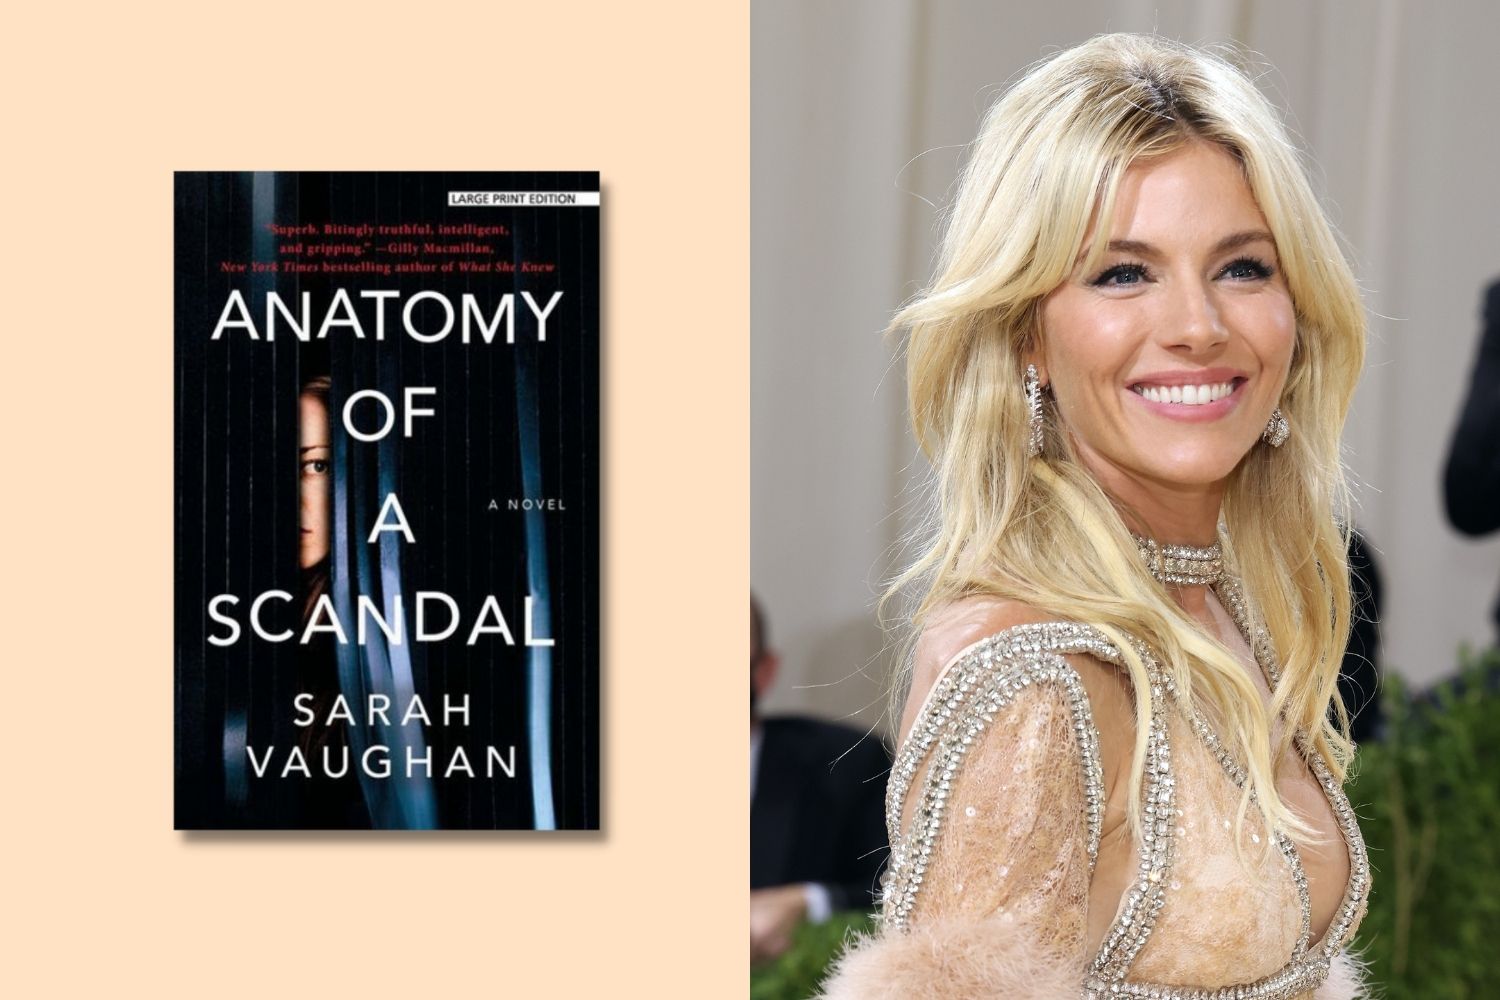 Anatomy-of-a-scandal